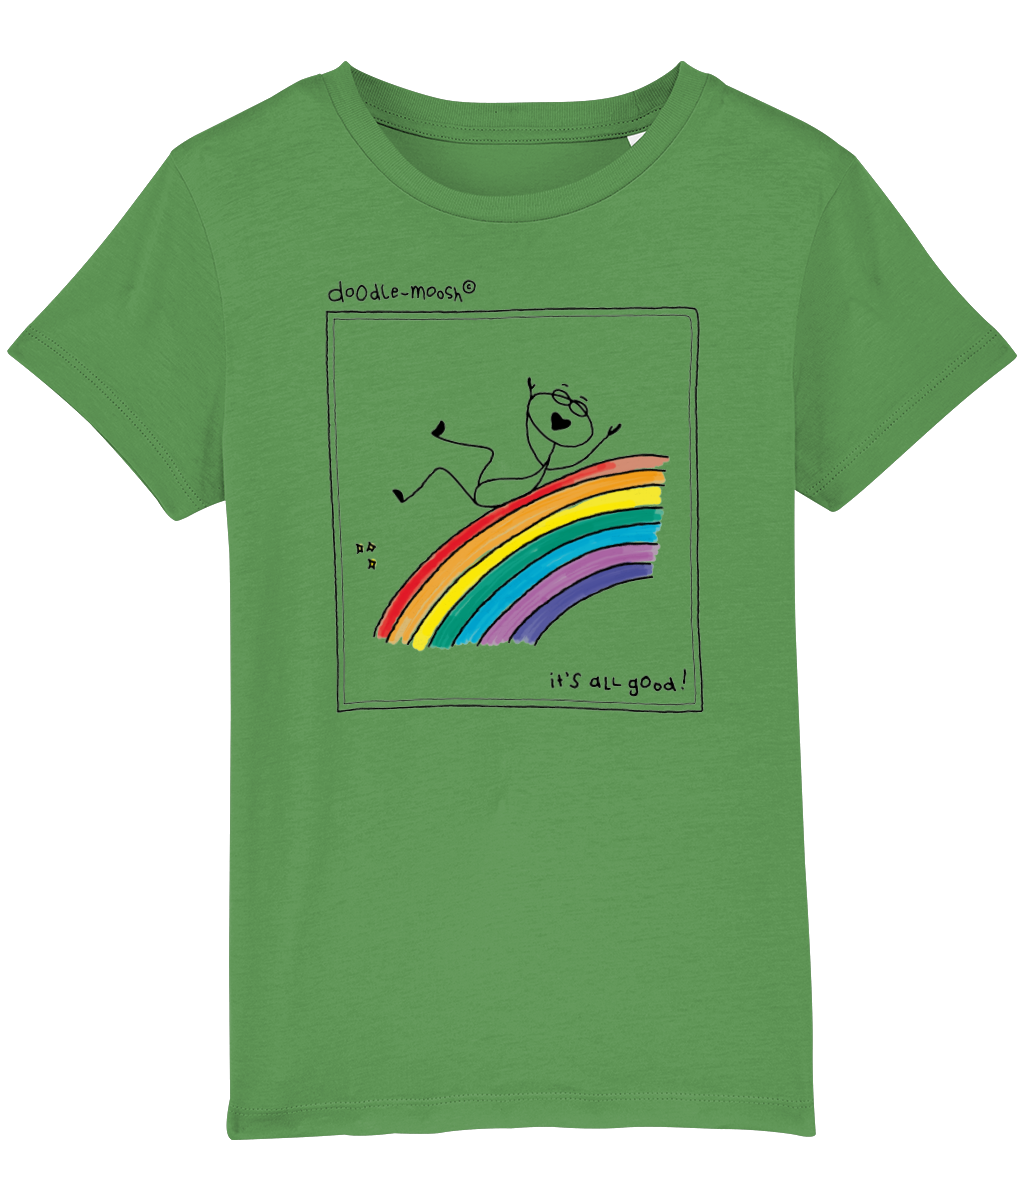 it's all good t-shirt, green with black, colored rainbow